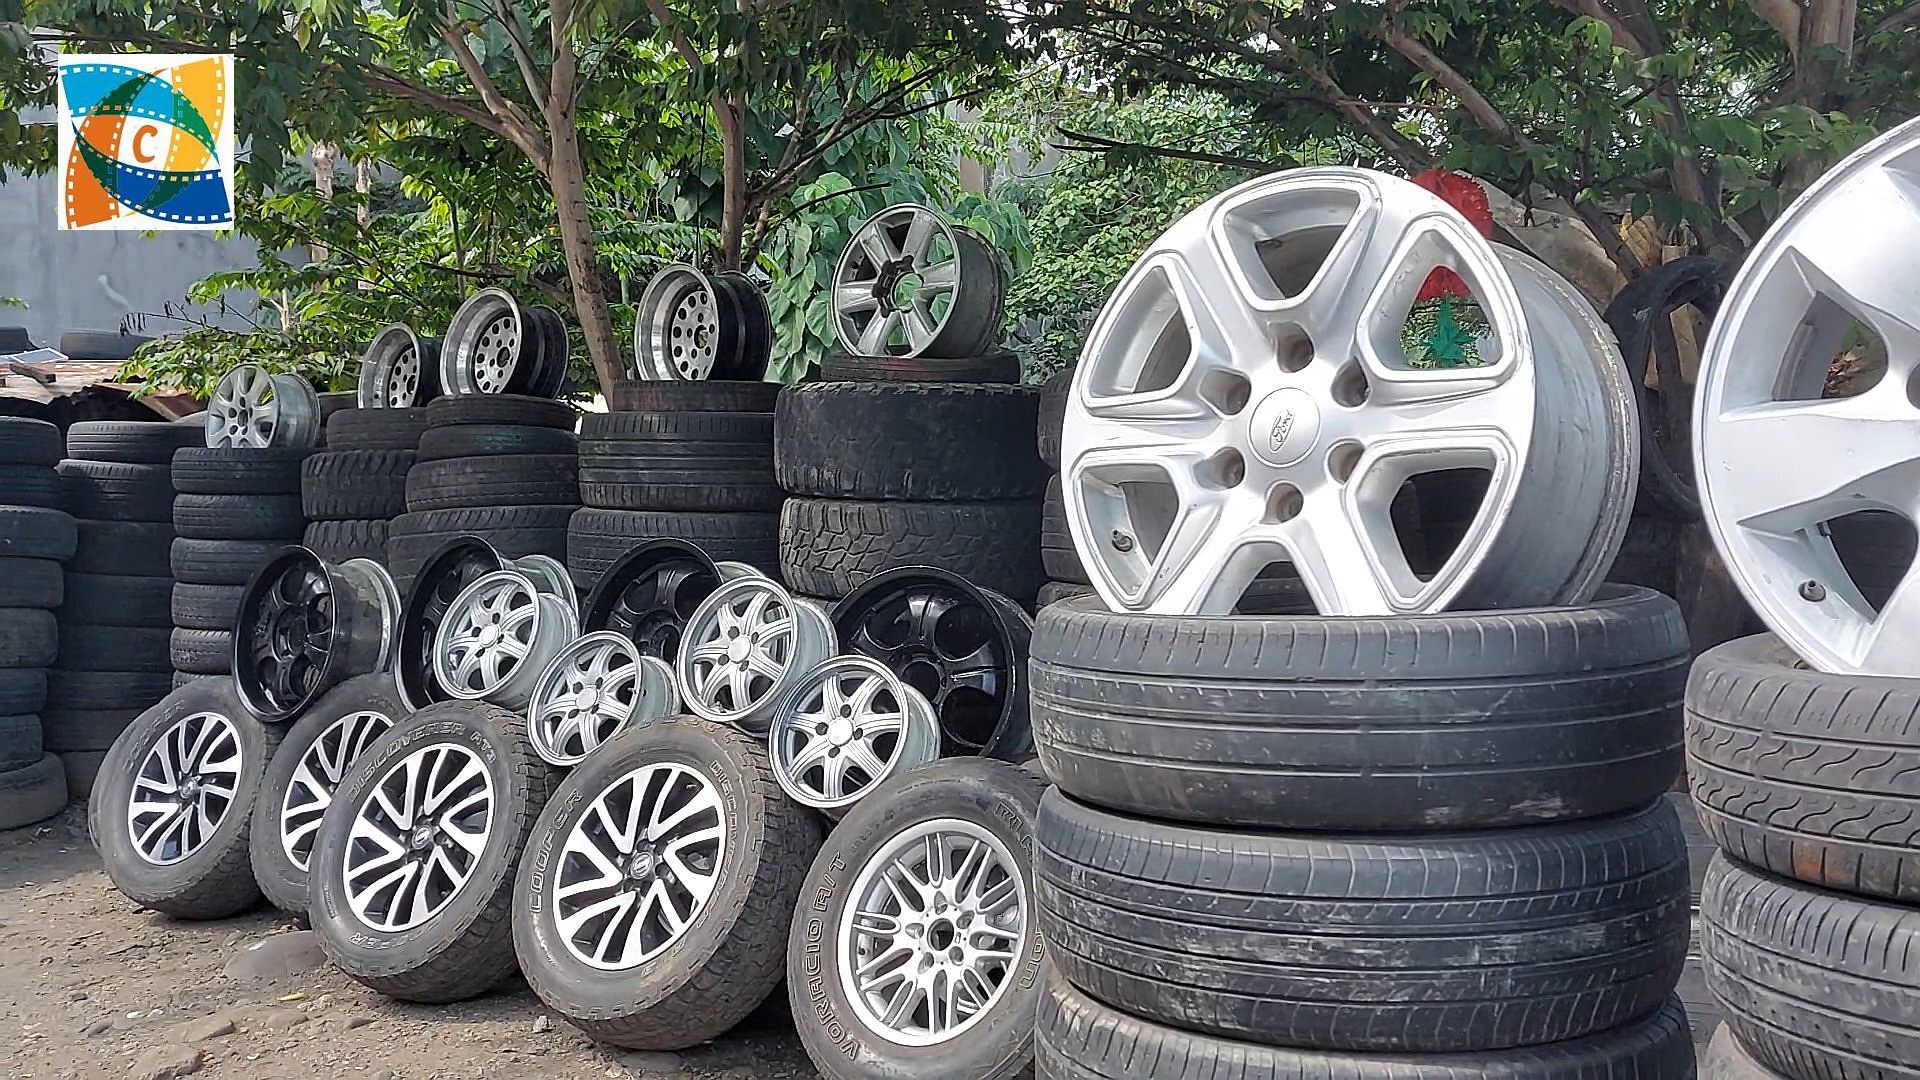 SIGHTS OF CAGAYAN DE ORO CITY & NORTHERN MINDANAO - At the used Tire Dealers